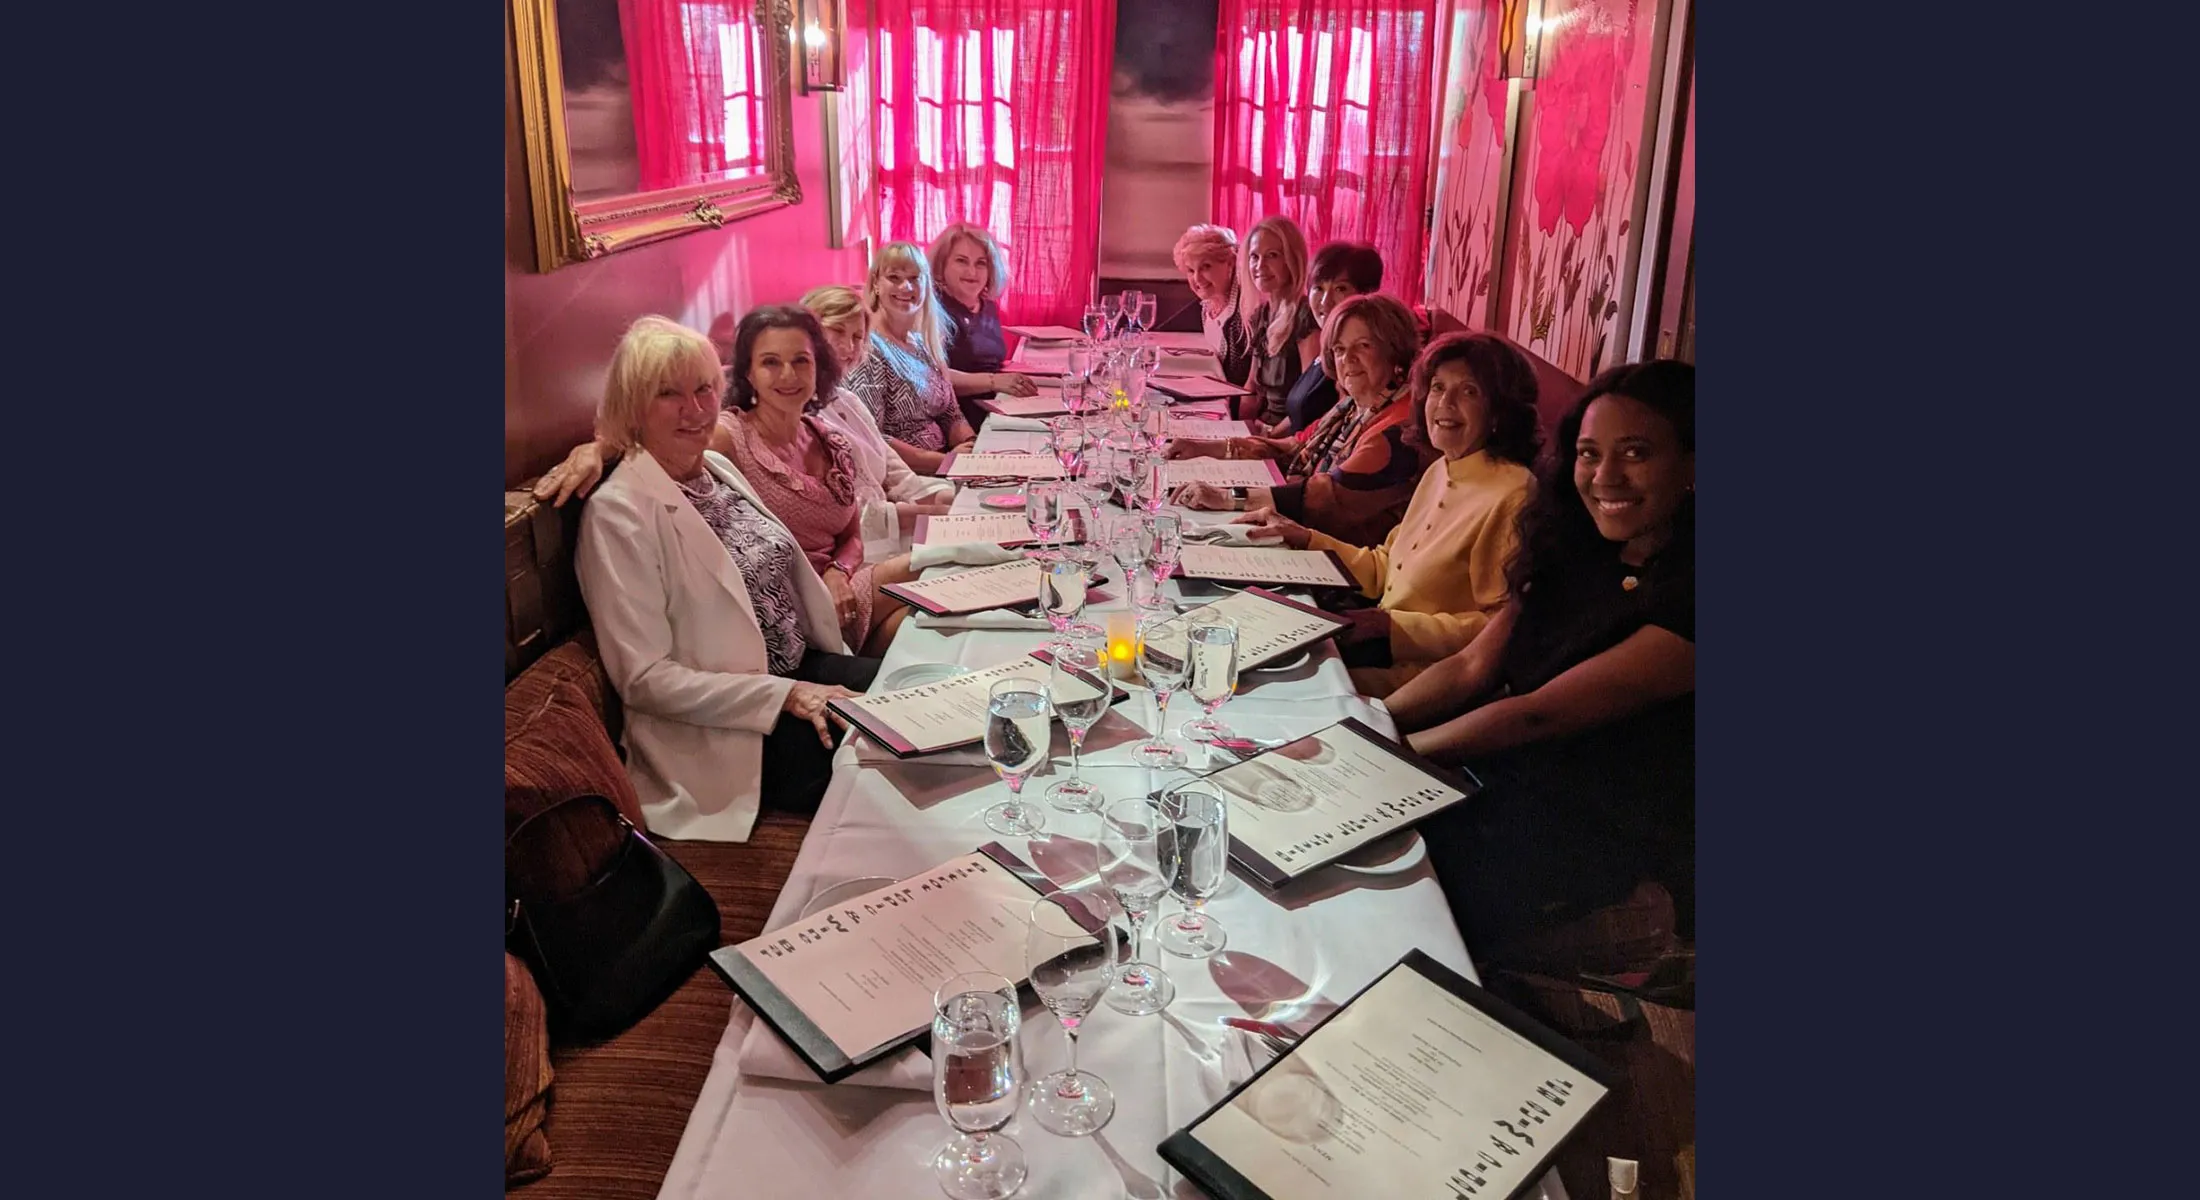 Ten CARE Women’s Network members and CARE staff connecting over dinner.